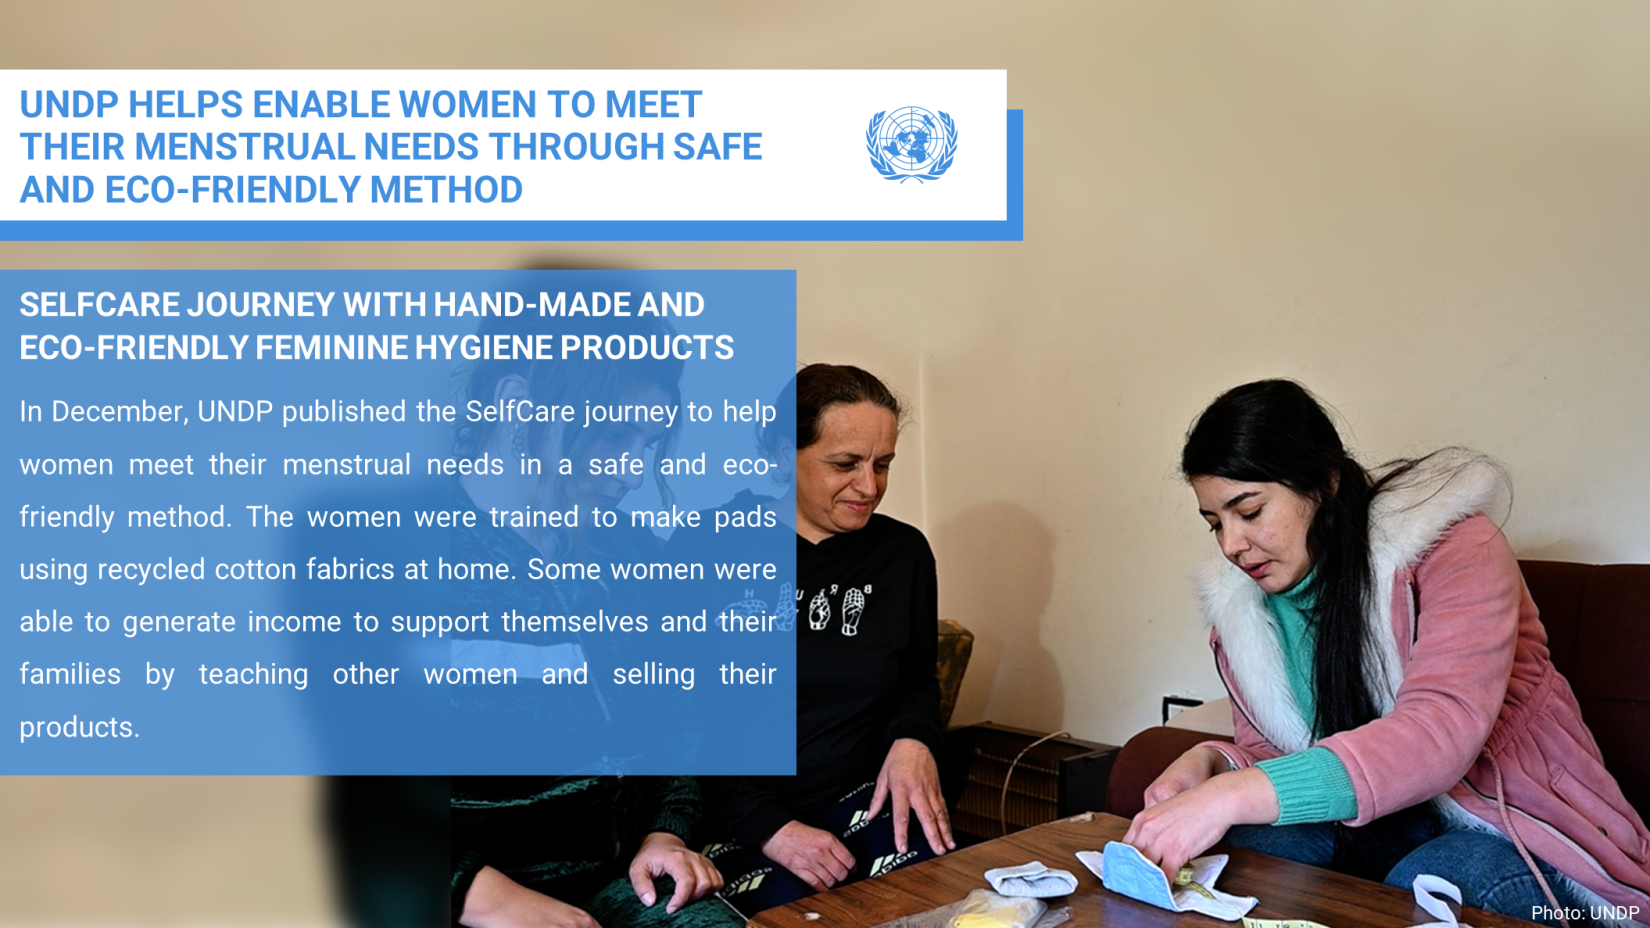 UNDP HELPS ENABLE WOMEN TO MEET THEIR MENSTRUAL NEEDS THROUGH SAFE AND ECO-FRIENDLY METHODS